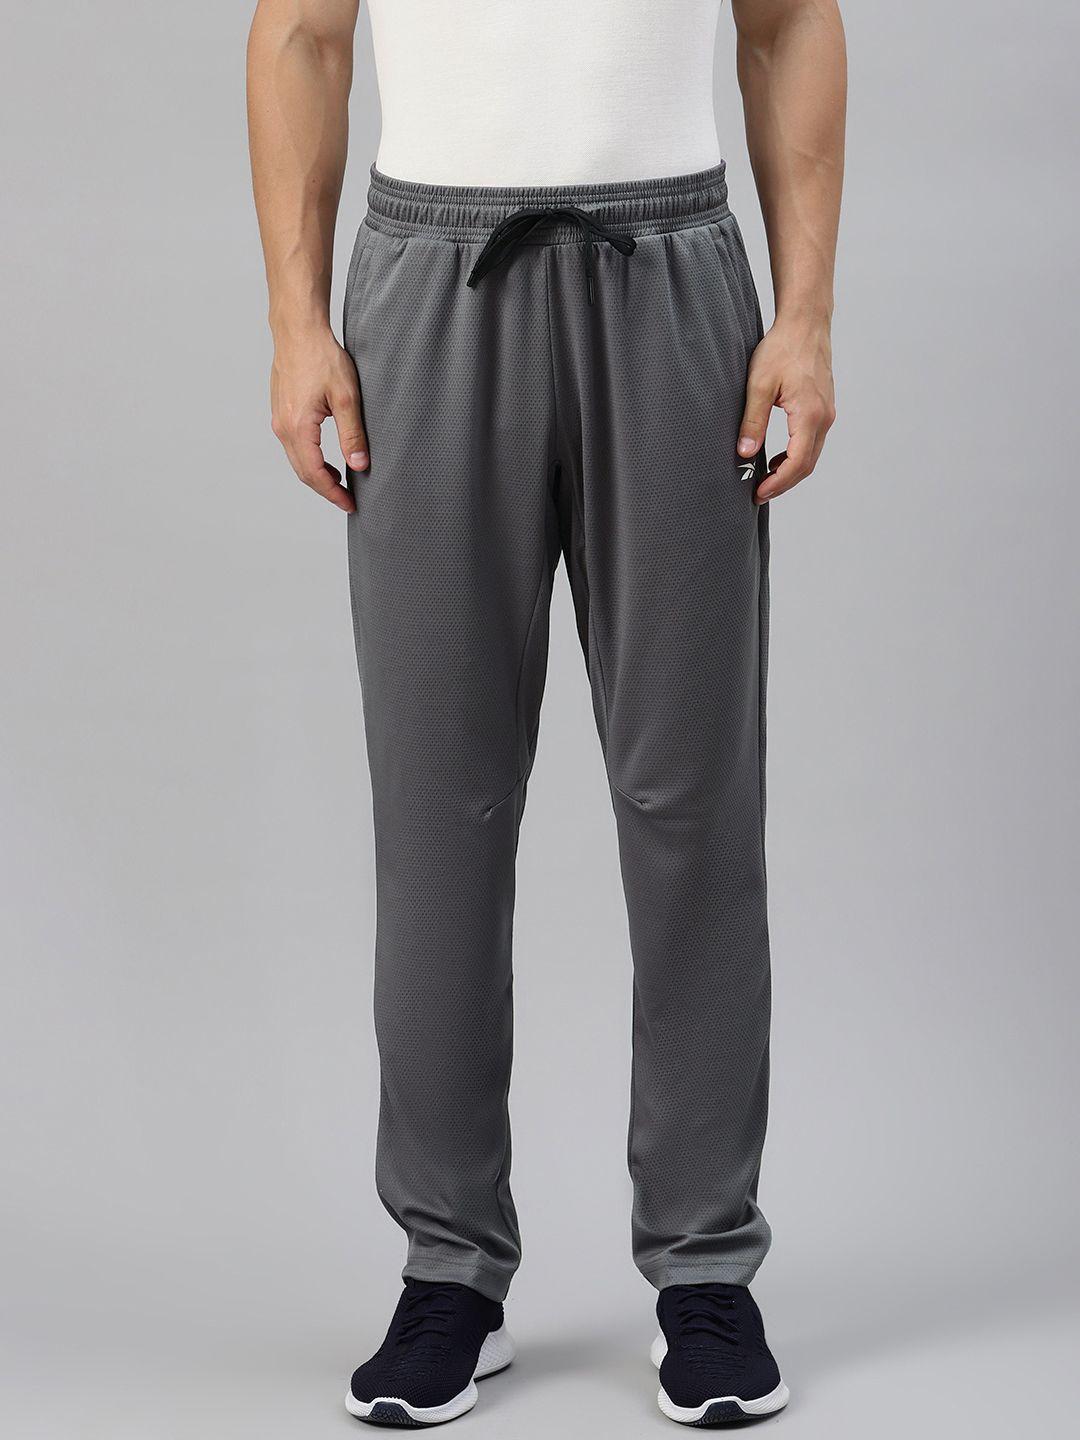 reebok men charcoal grey solid slim speedwick workout knit oh training or gym track pants